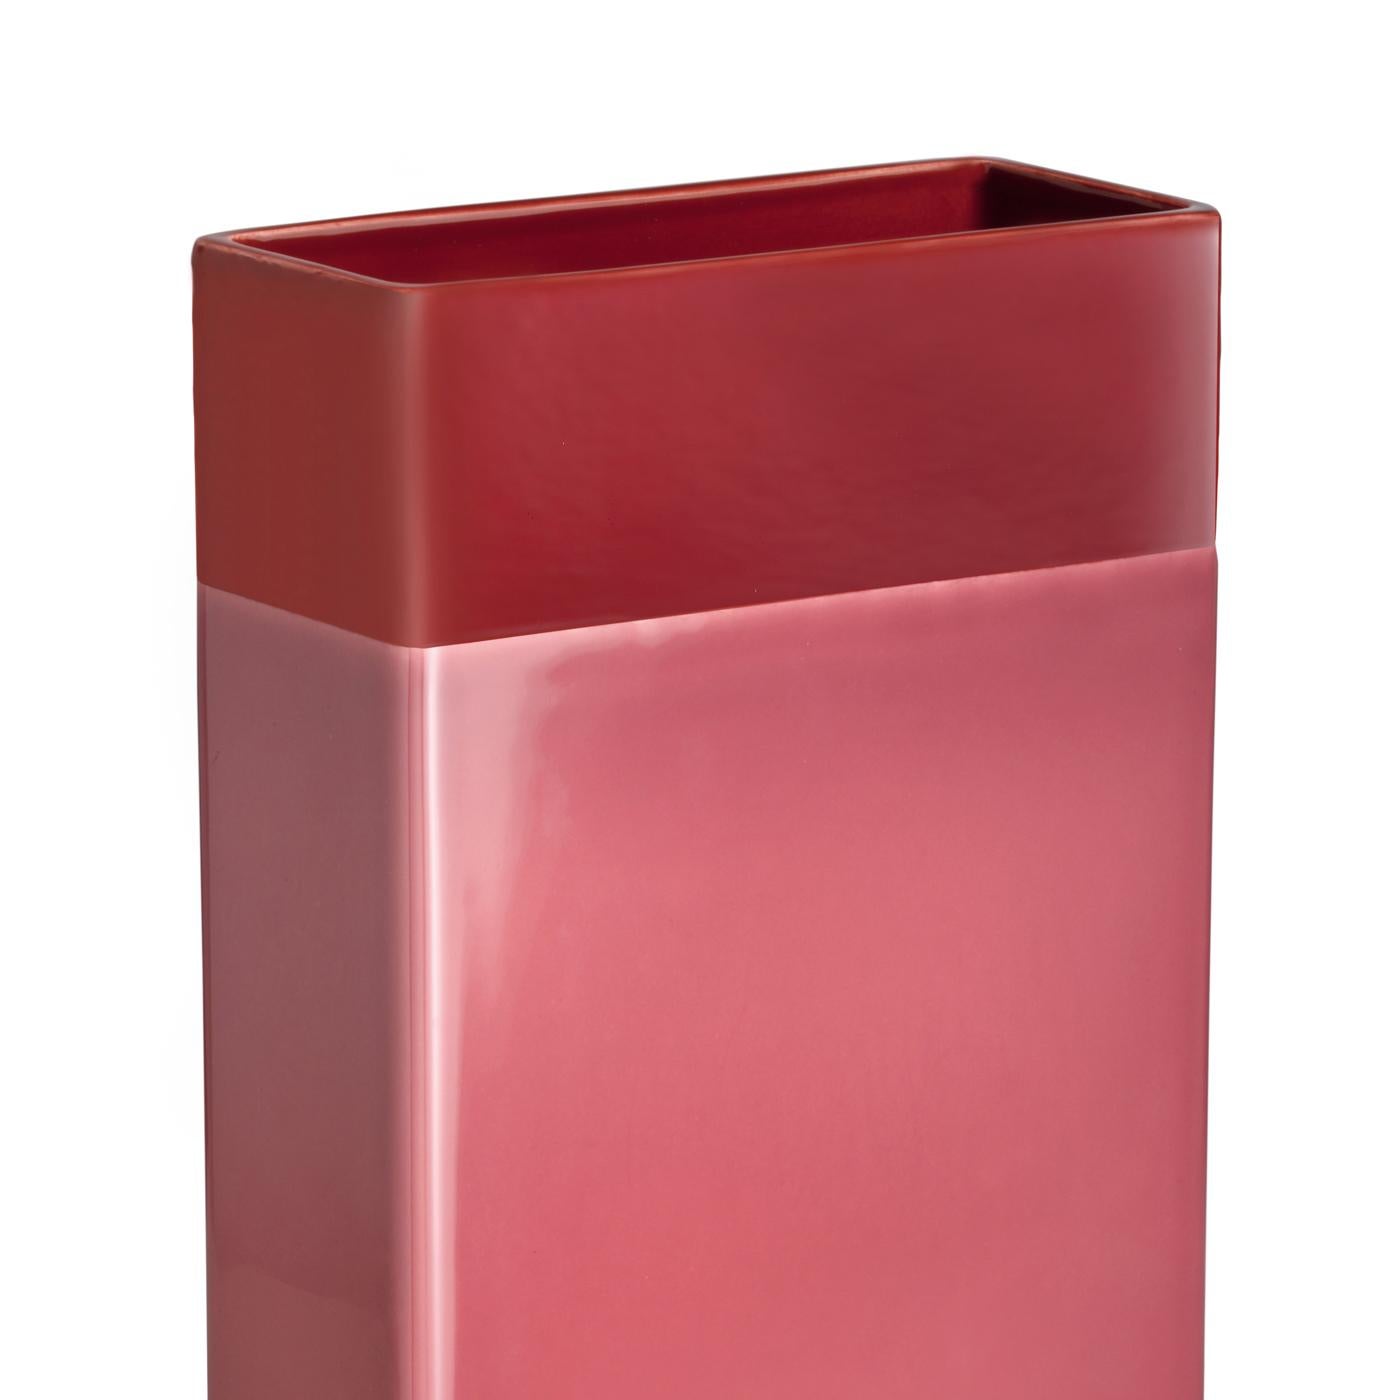 This striking vase has a simple, rectangular shape, highlighted with a brass strip at the bottom and two different solid finishes, one large strip in pink and a vivid red top. The piece, in white clay, was designed in 2016 by Dimore Studio for